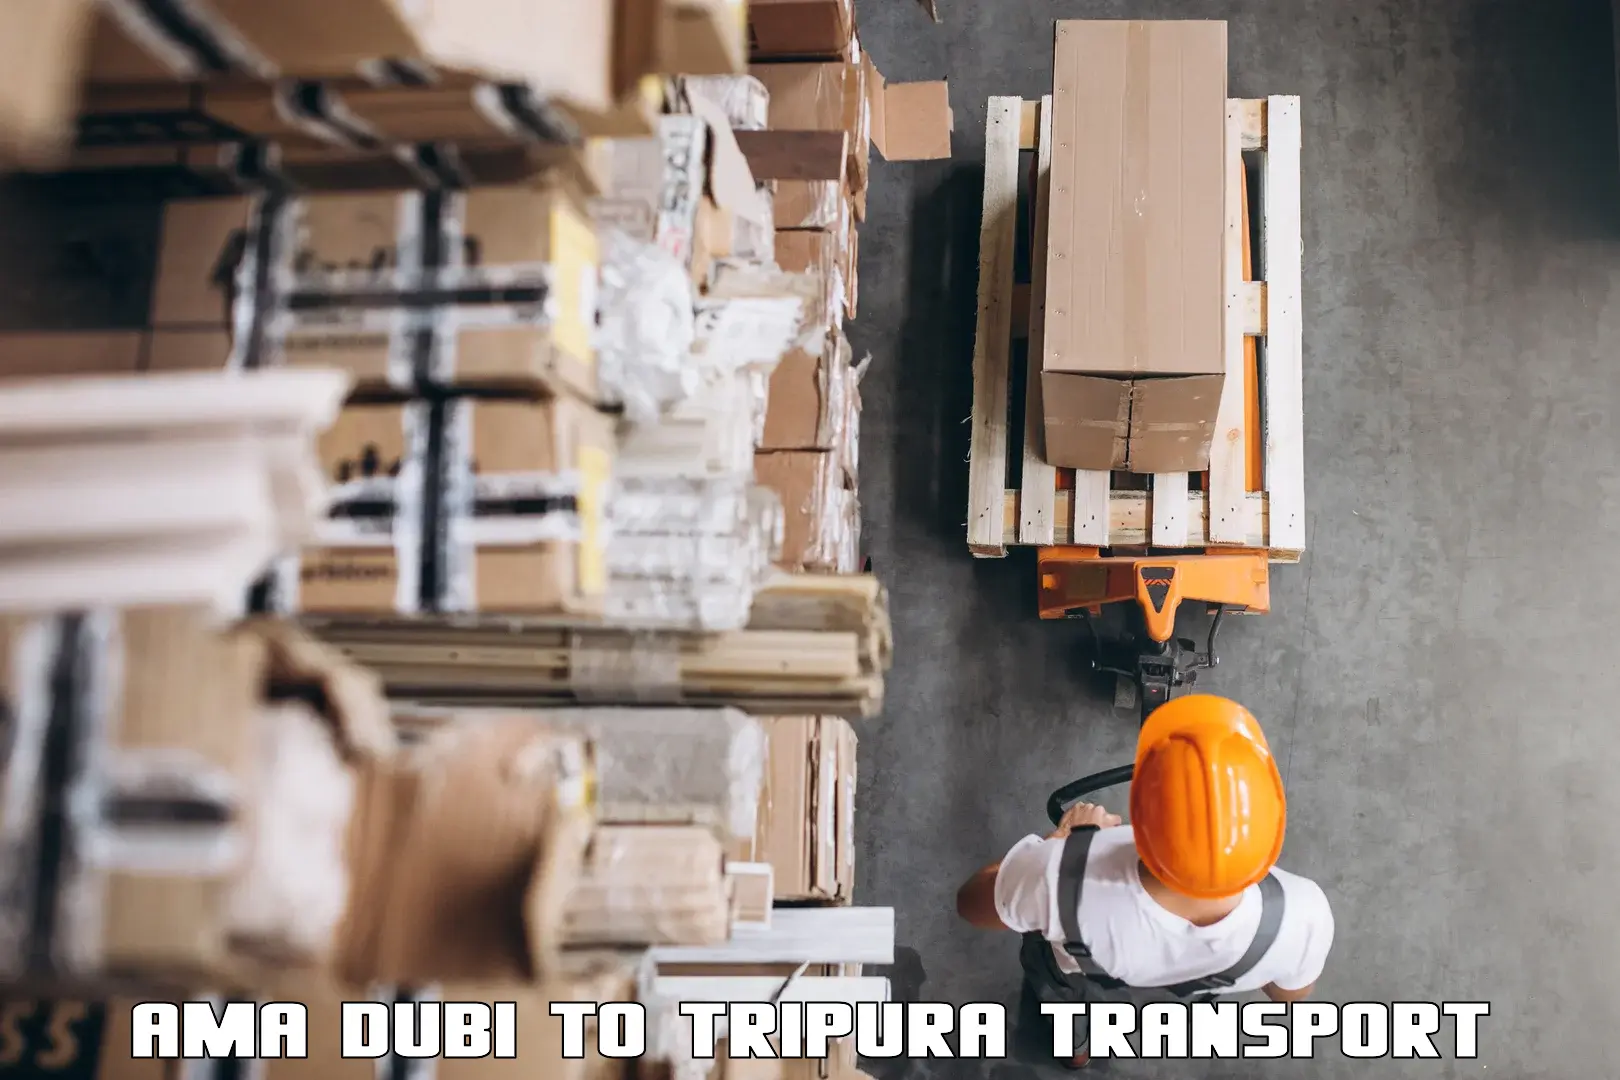 Transport shared services Ama Dubi to Aambasa